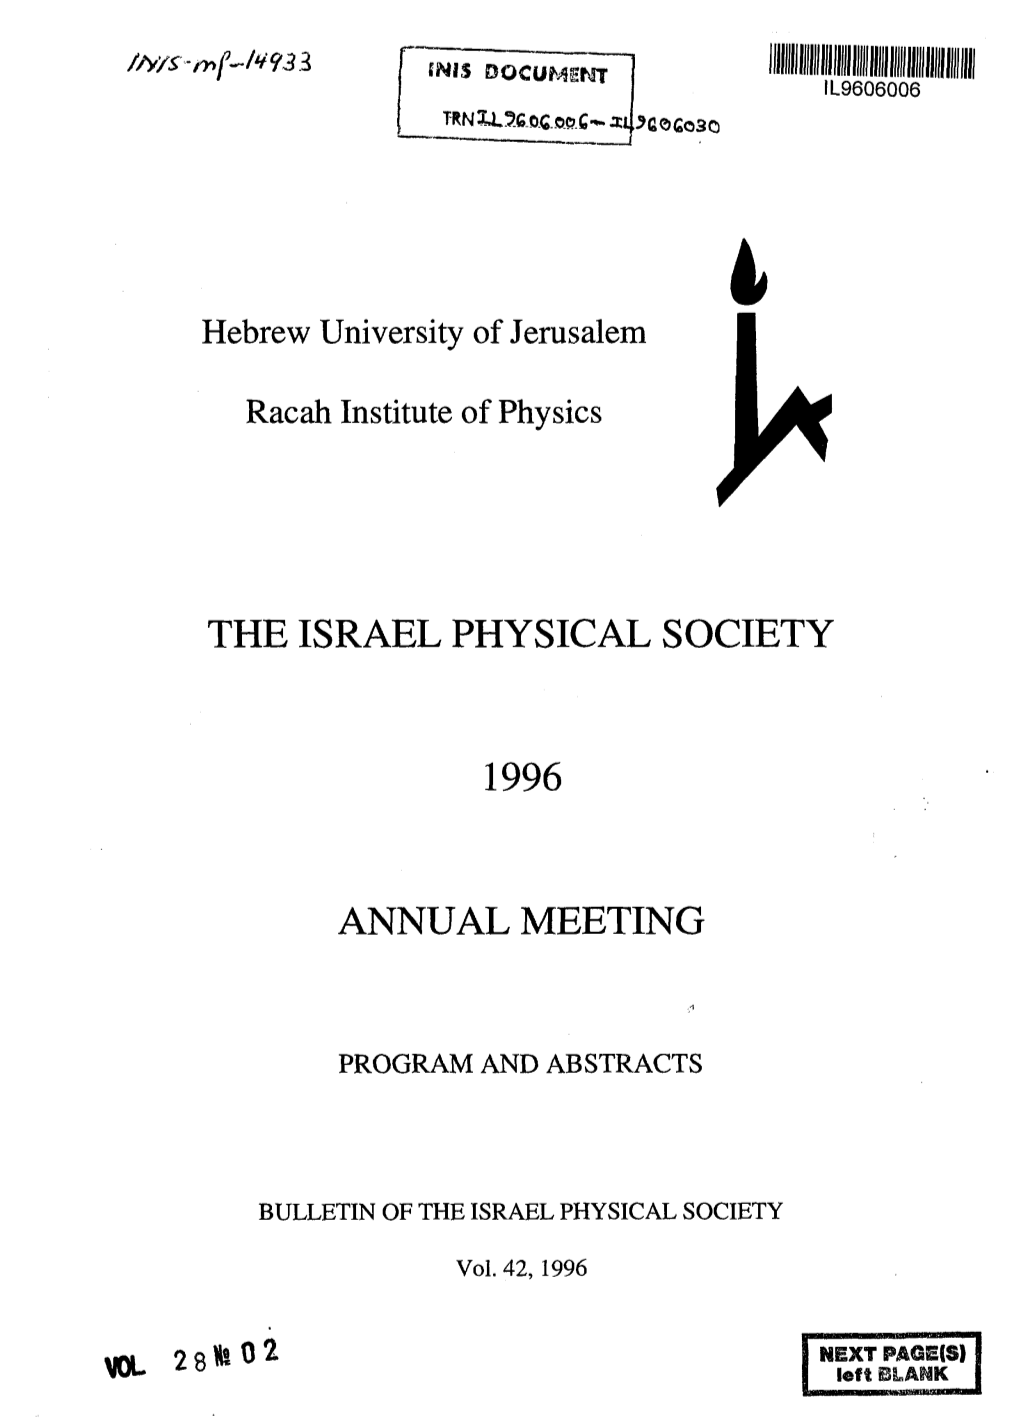 The Israel Physical Society 1996 Annual Meeting